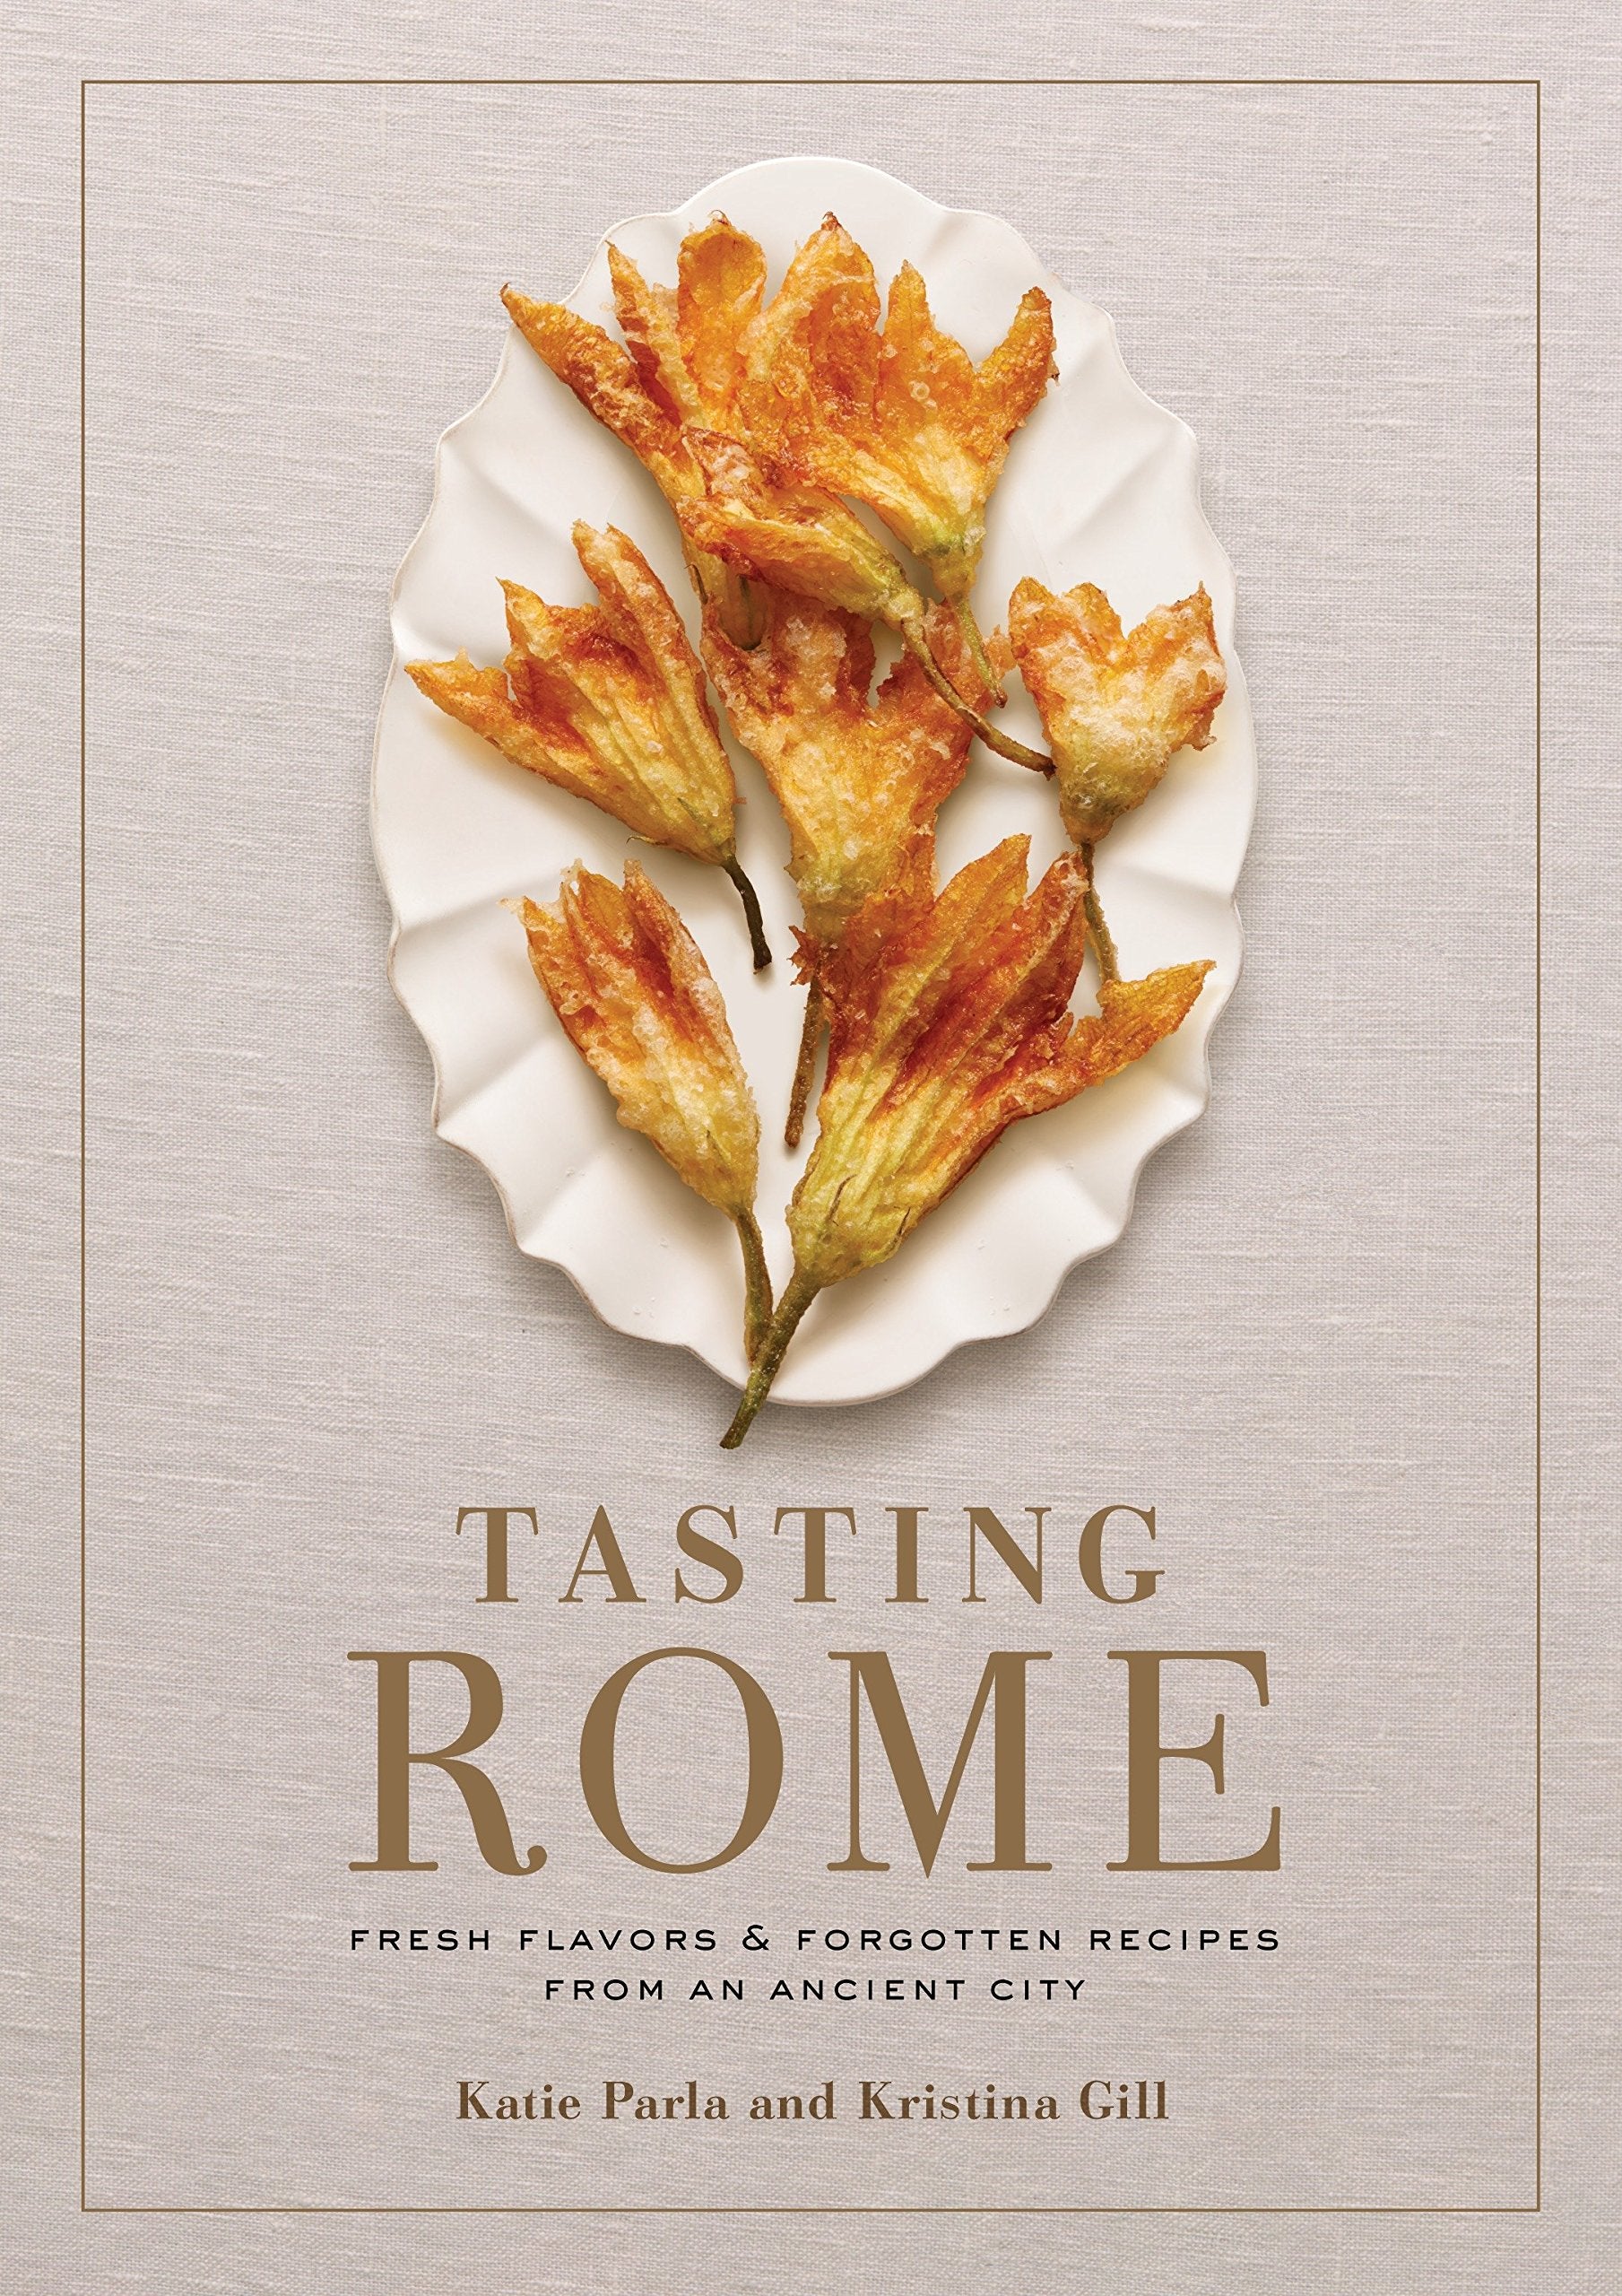 Tasting Rome : Fresh Flavors & Forgotten Recipes from an Ancient City - book by Katie Parla and Kristina Gill